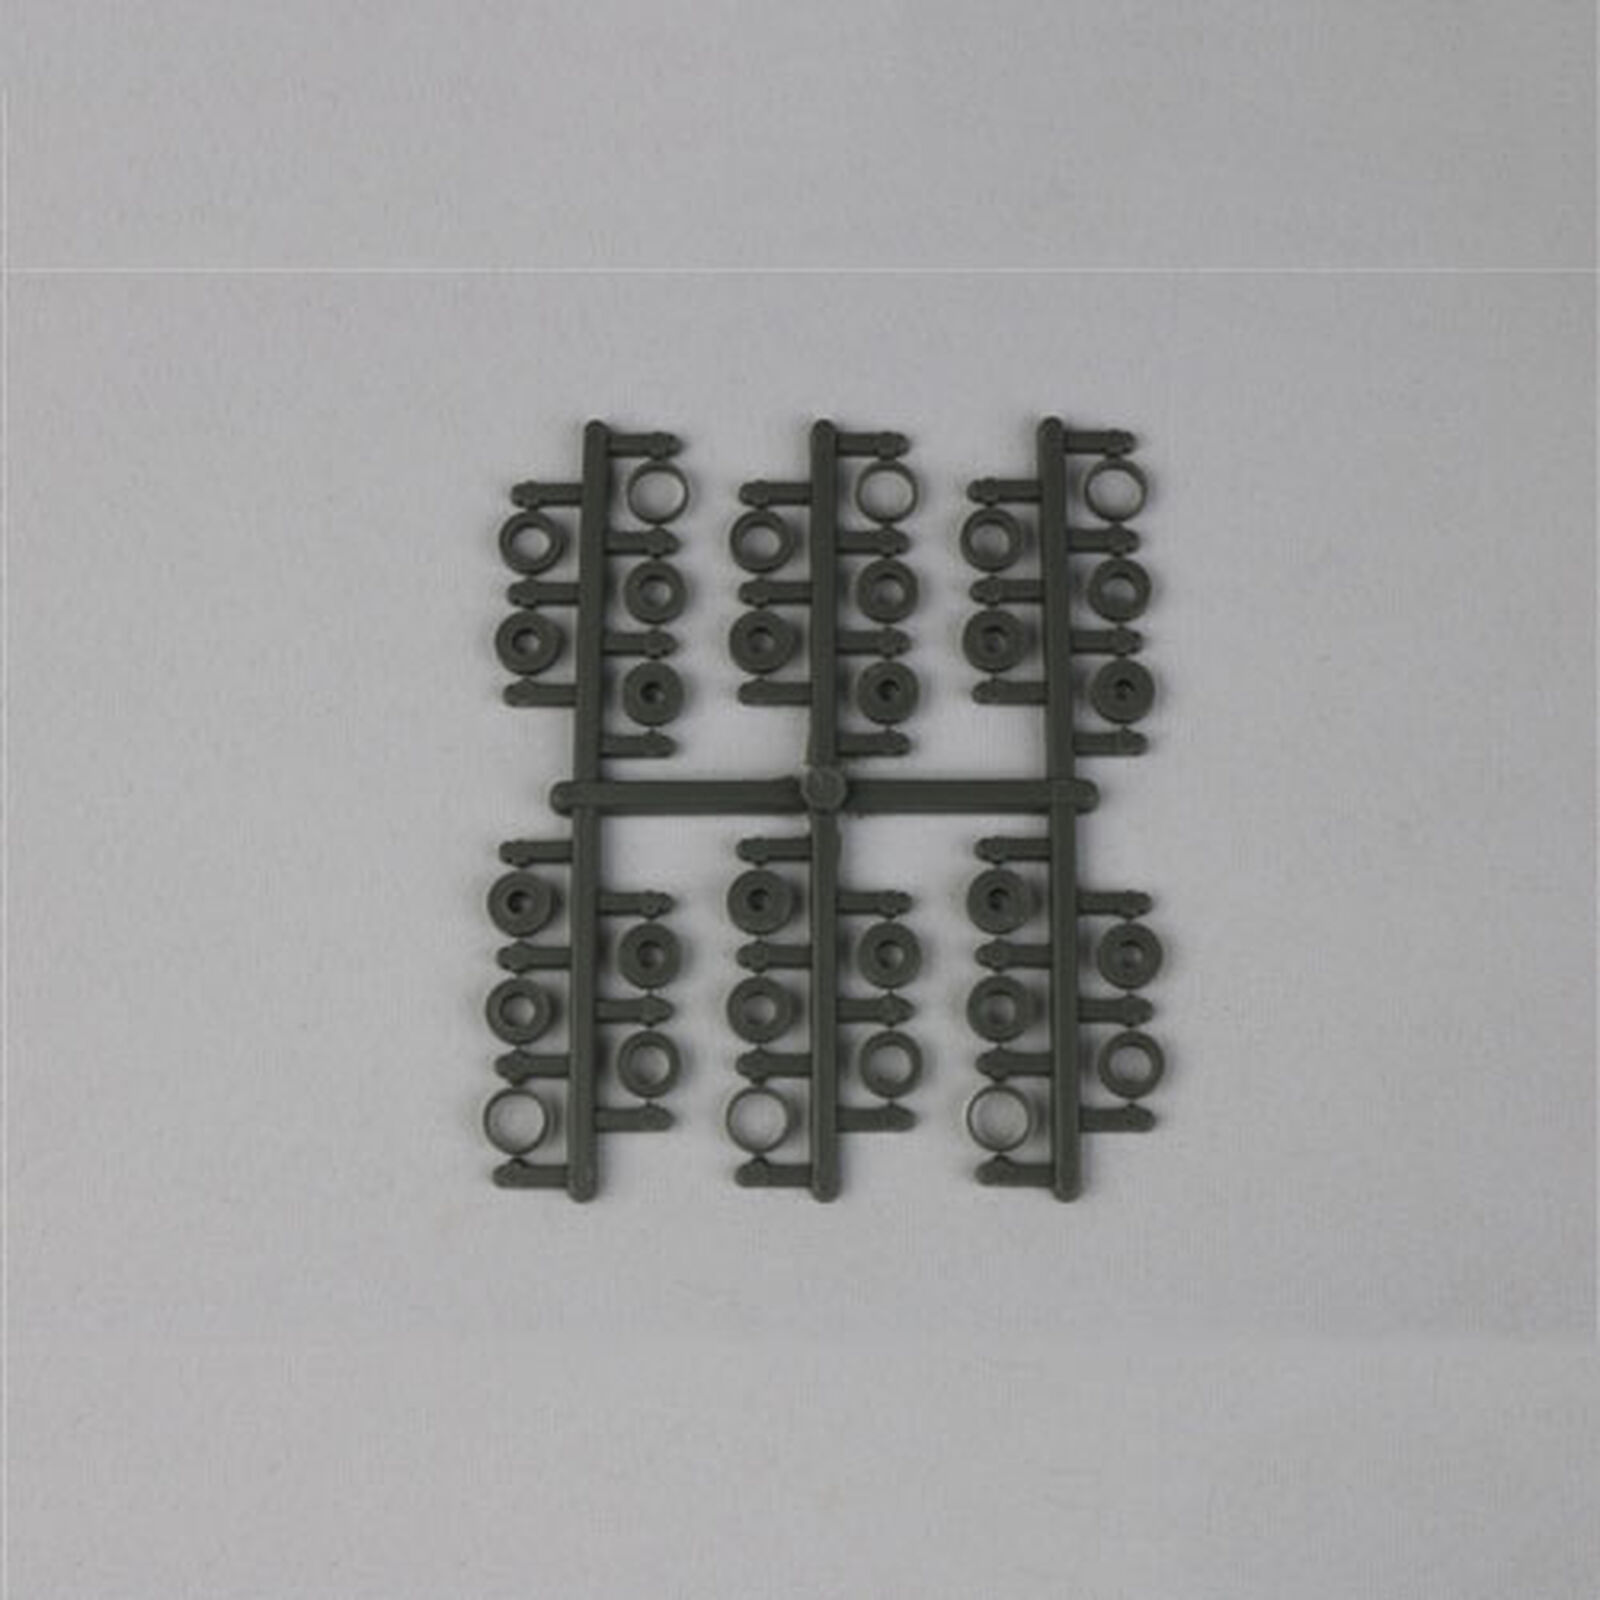 Adapter Rings 6 Sets (1/8", 4mm, 5mm, 6mm, 5/16")